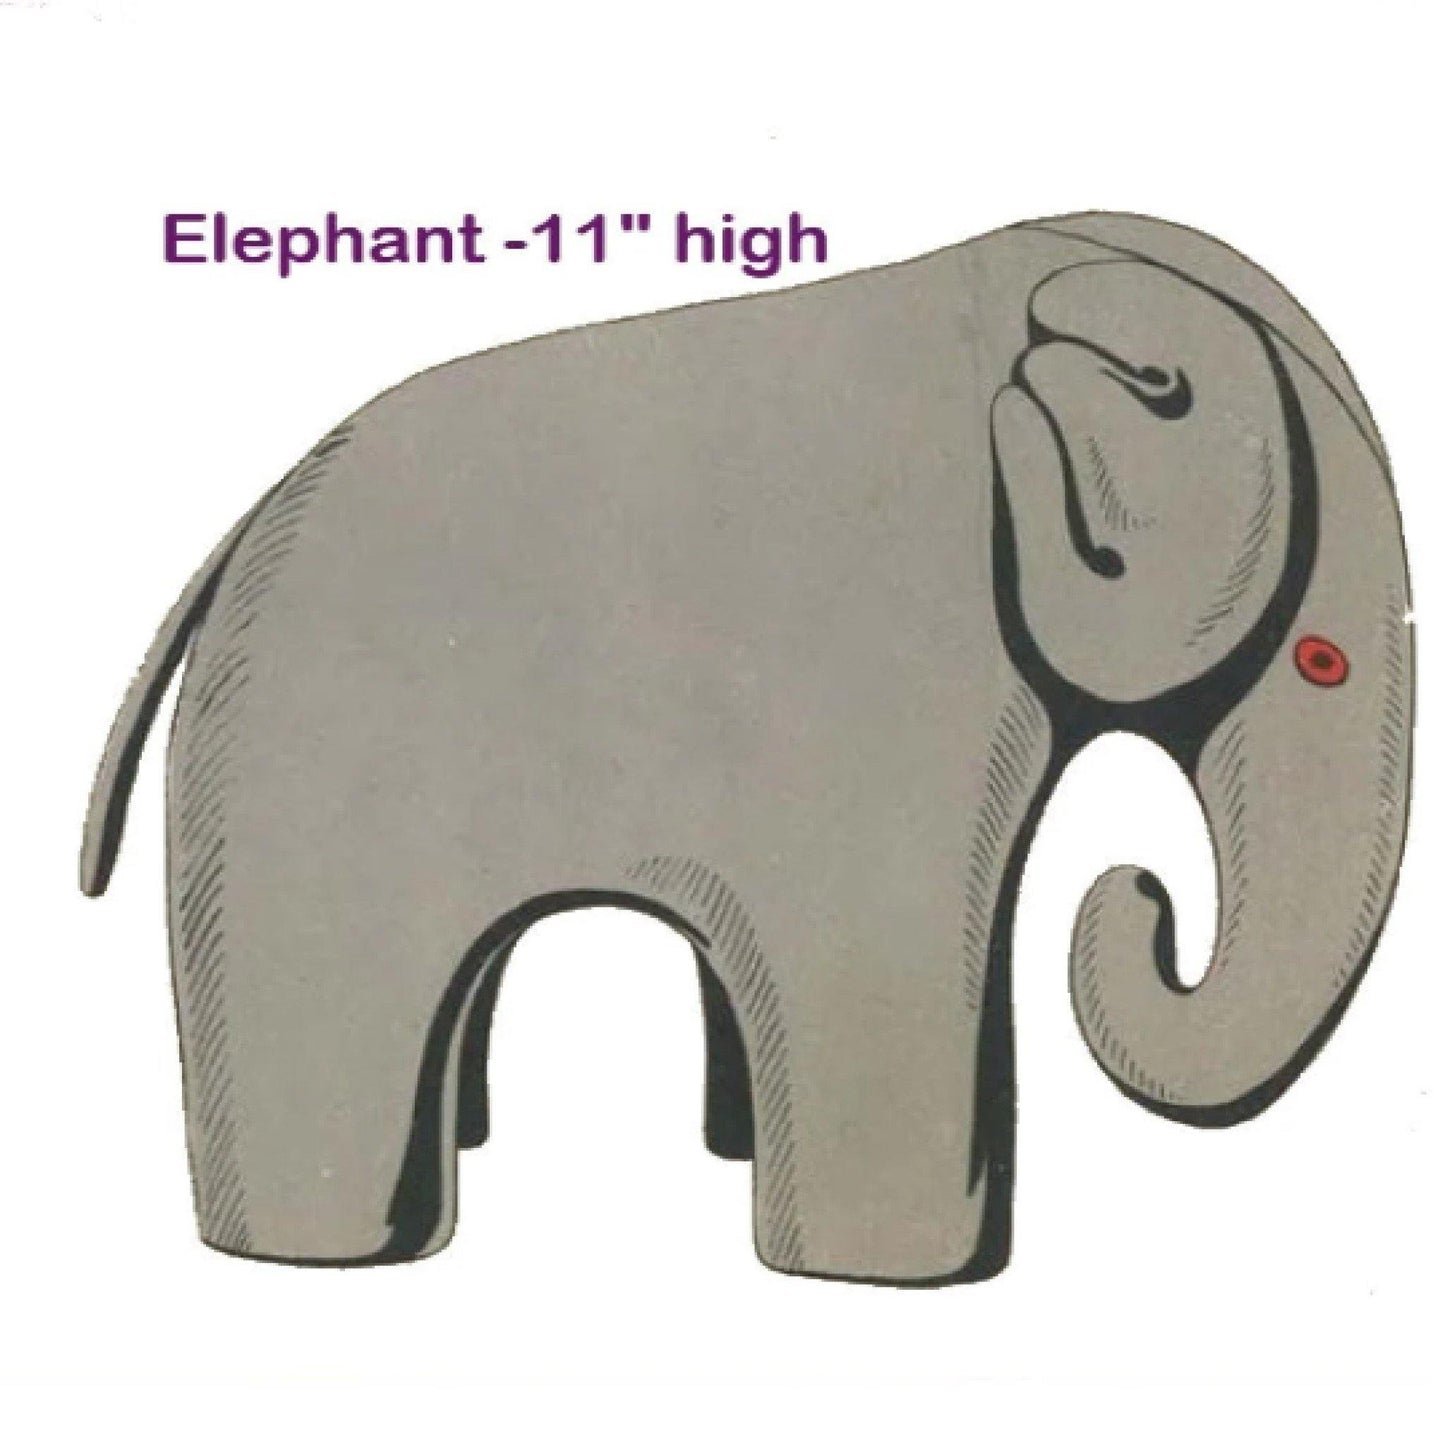 Vintage 1940s Sewing Pattern, Child's Soft Toy Elephant 11" PDF Download - Vintage Sewing Pattern Company